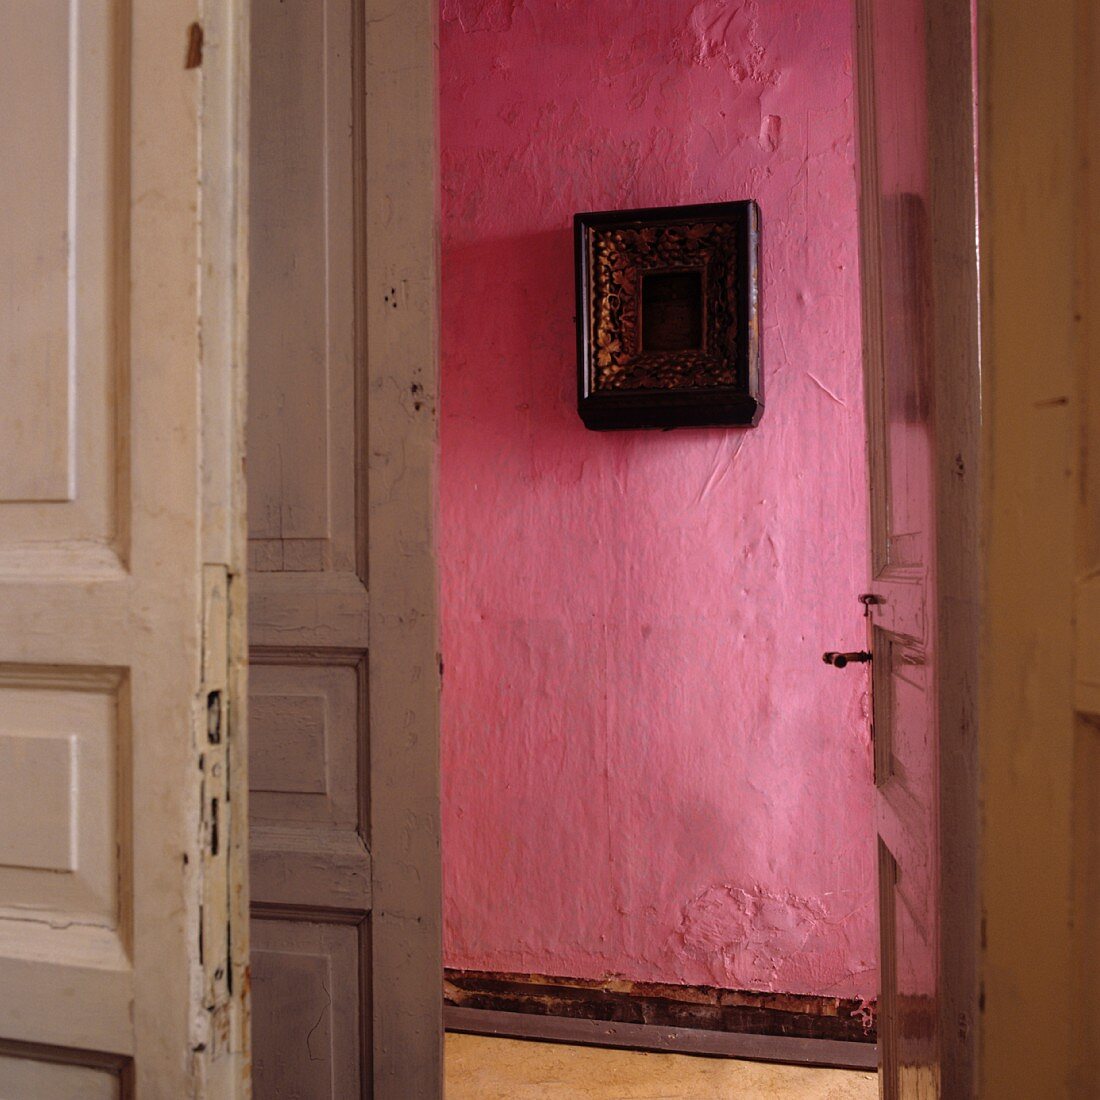 View through open door of picture on pink wall in corridor of period apartment